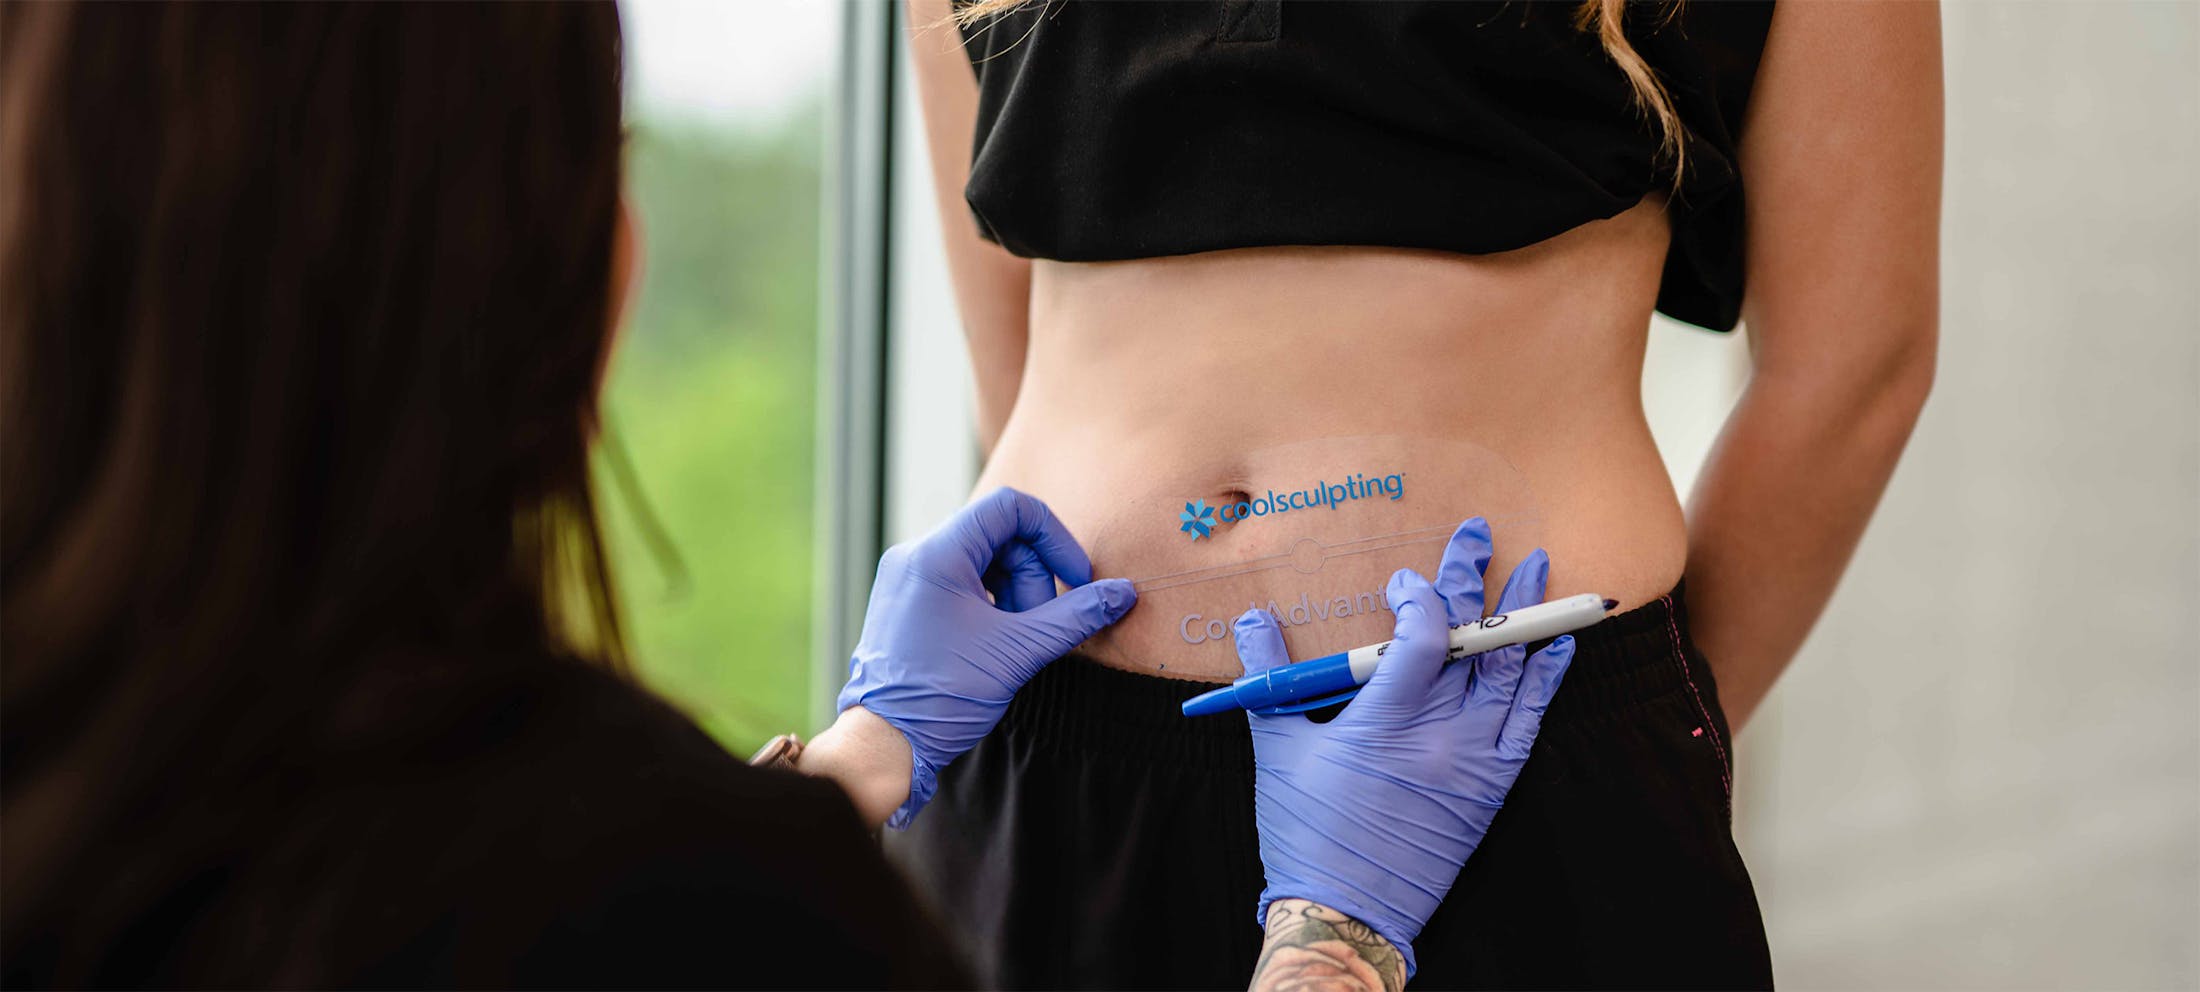 Woman prepping for CoolSculpting treatment